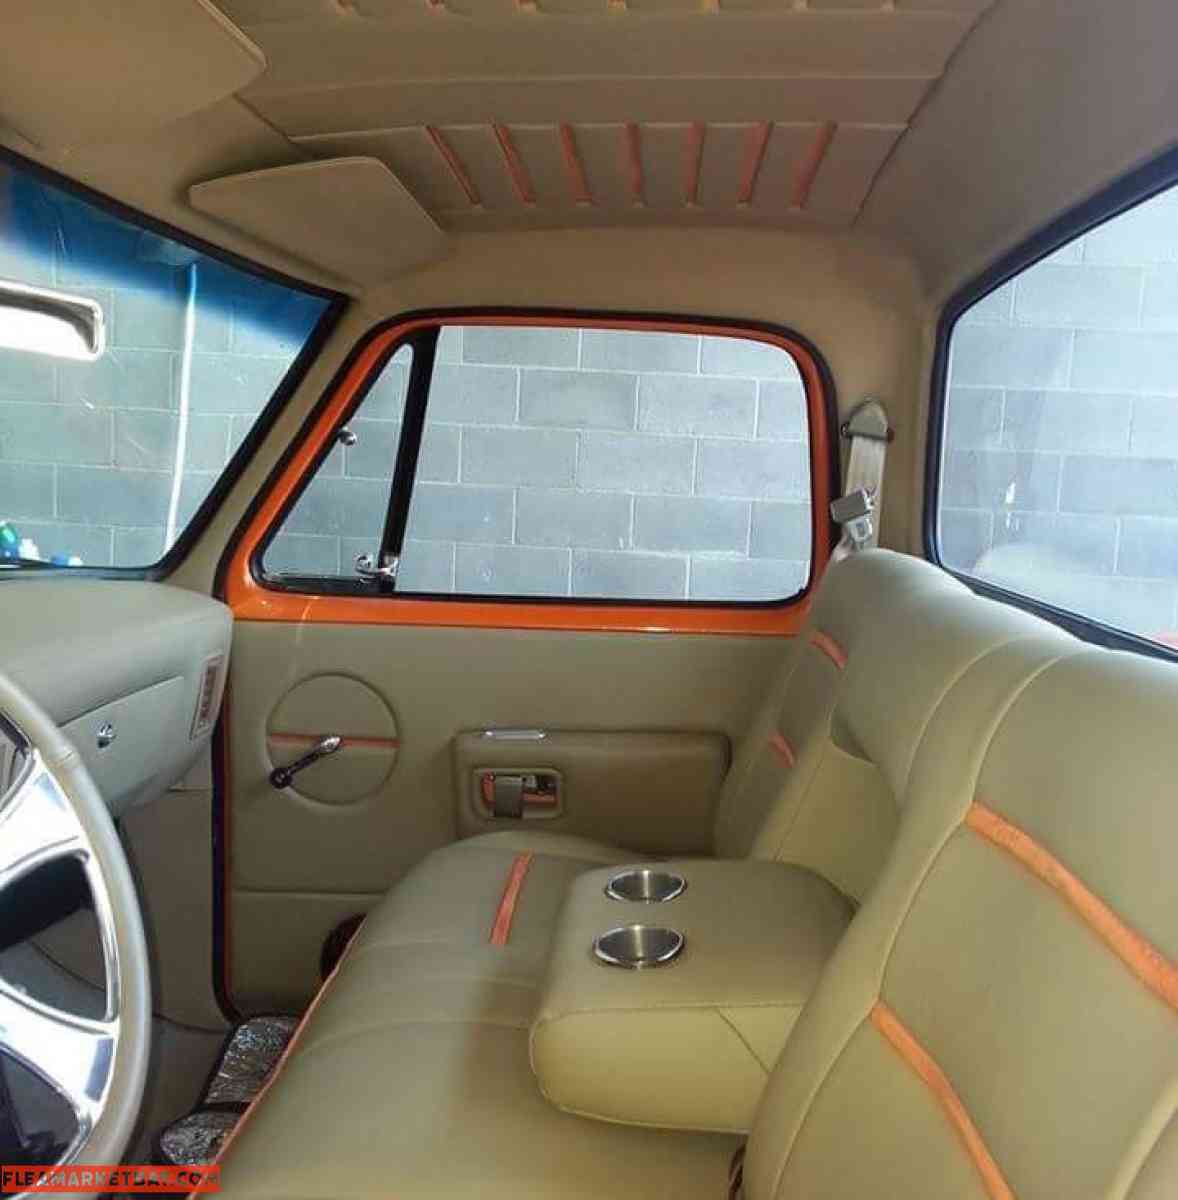 auto upholstery classic Cars Trucks Boats barcos truck 💺